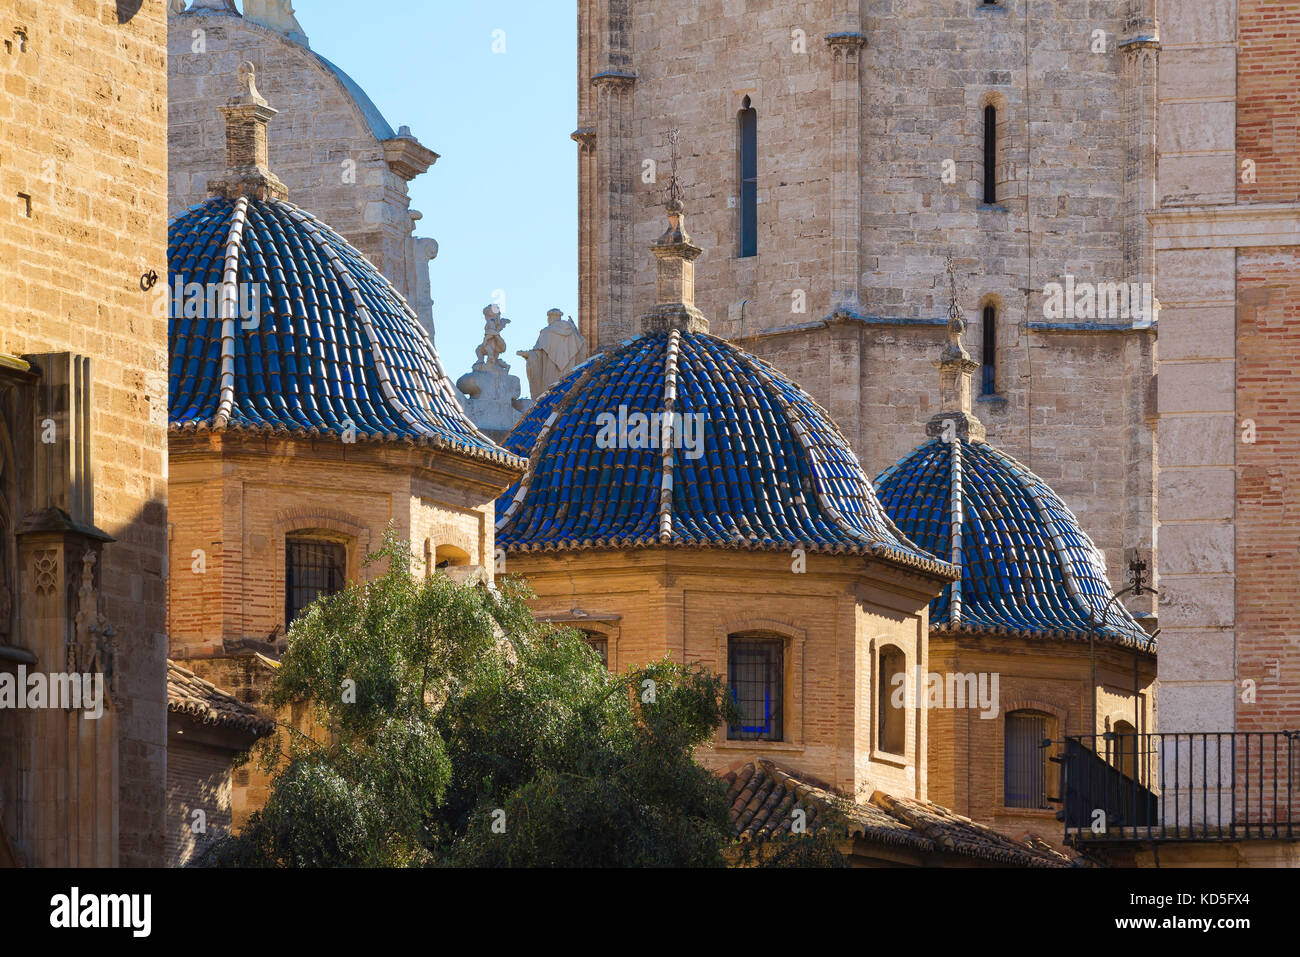 Cathedral Valencia Spain, view of three blue ceramic tiled pepper-pot towers lining the west side of the Santa Catalina Cathedral in Valencia, Spain. Stock Photo